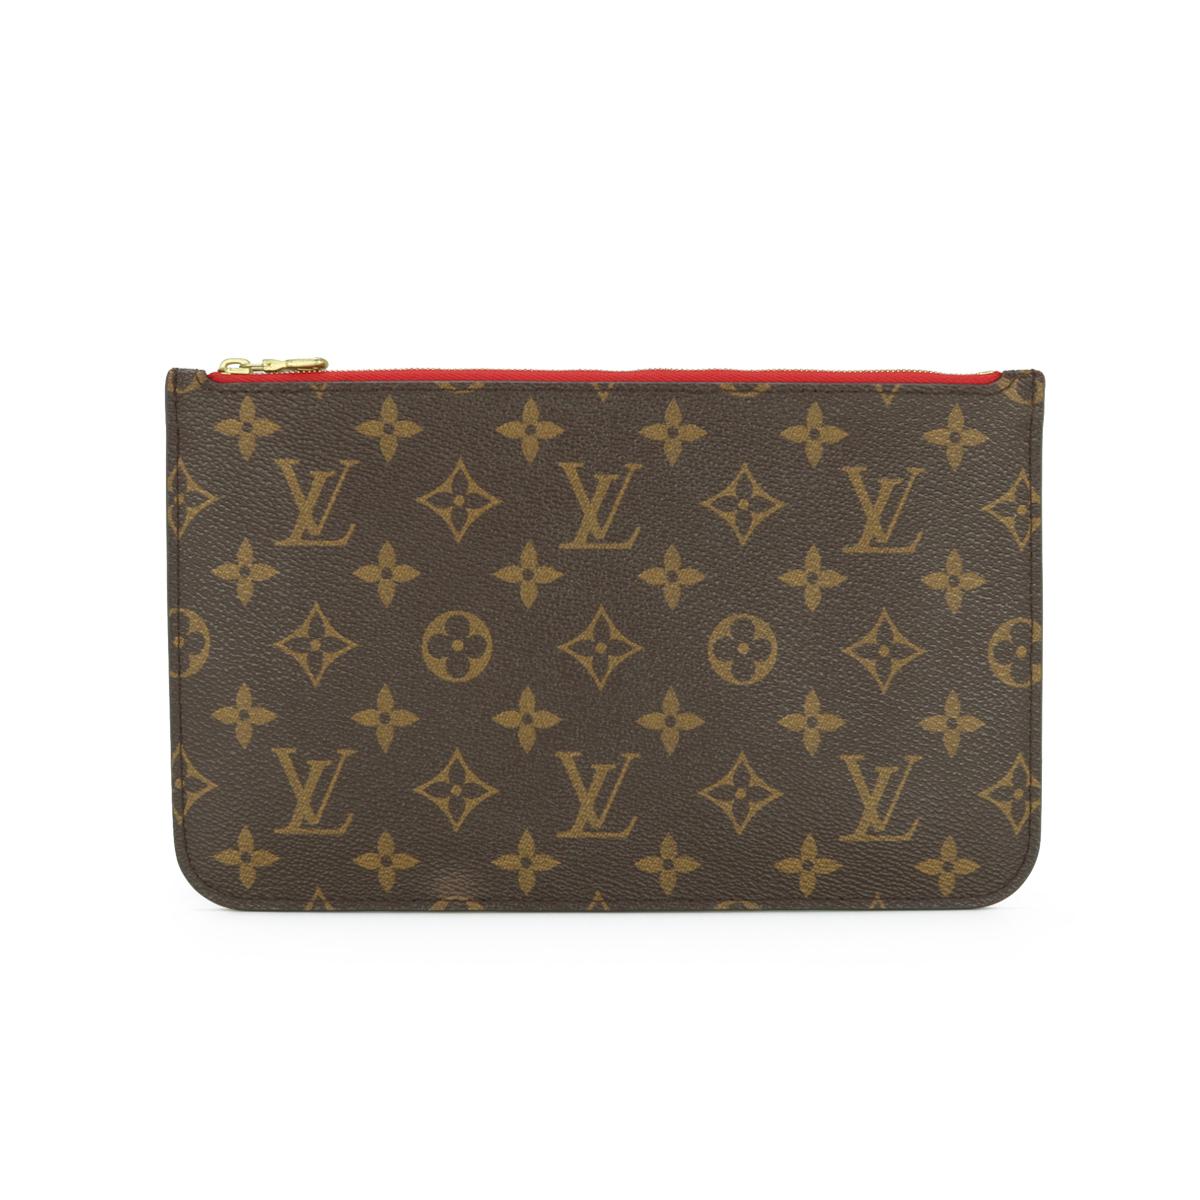 Louis Vuitton Neverfull MM Zip Pochette Pouch in Monogram with Cherry Red Interior 2019.

This pouch is in good condition. 

- Exterior Condition: Good condition. The outside of the pouch shows signs of wear. There is inking wear to the corners and